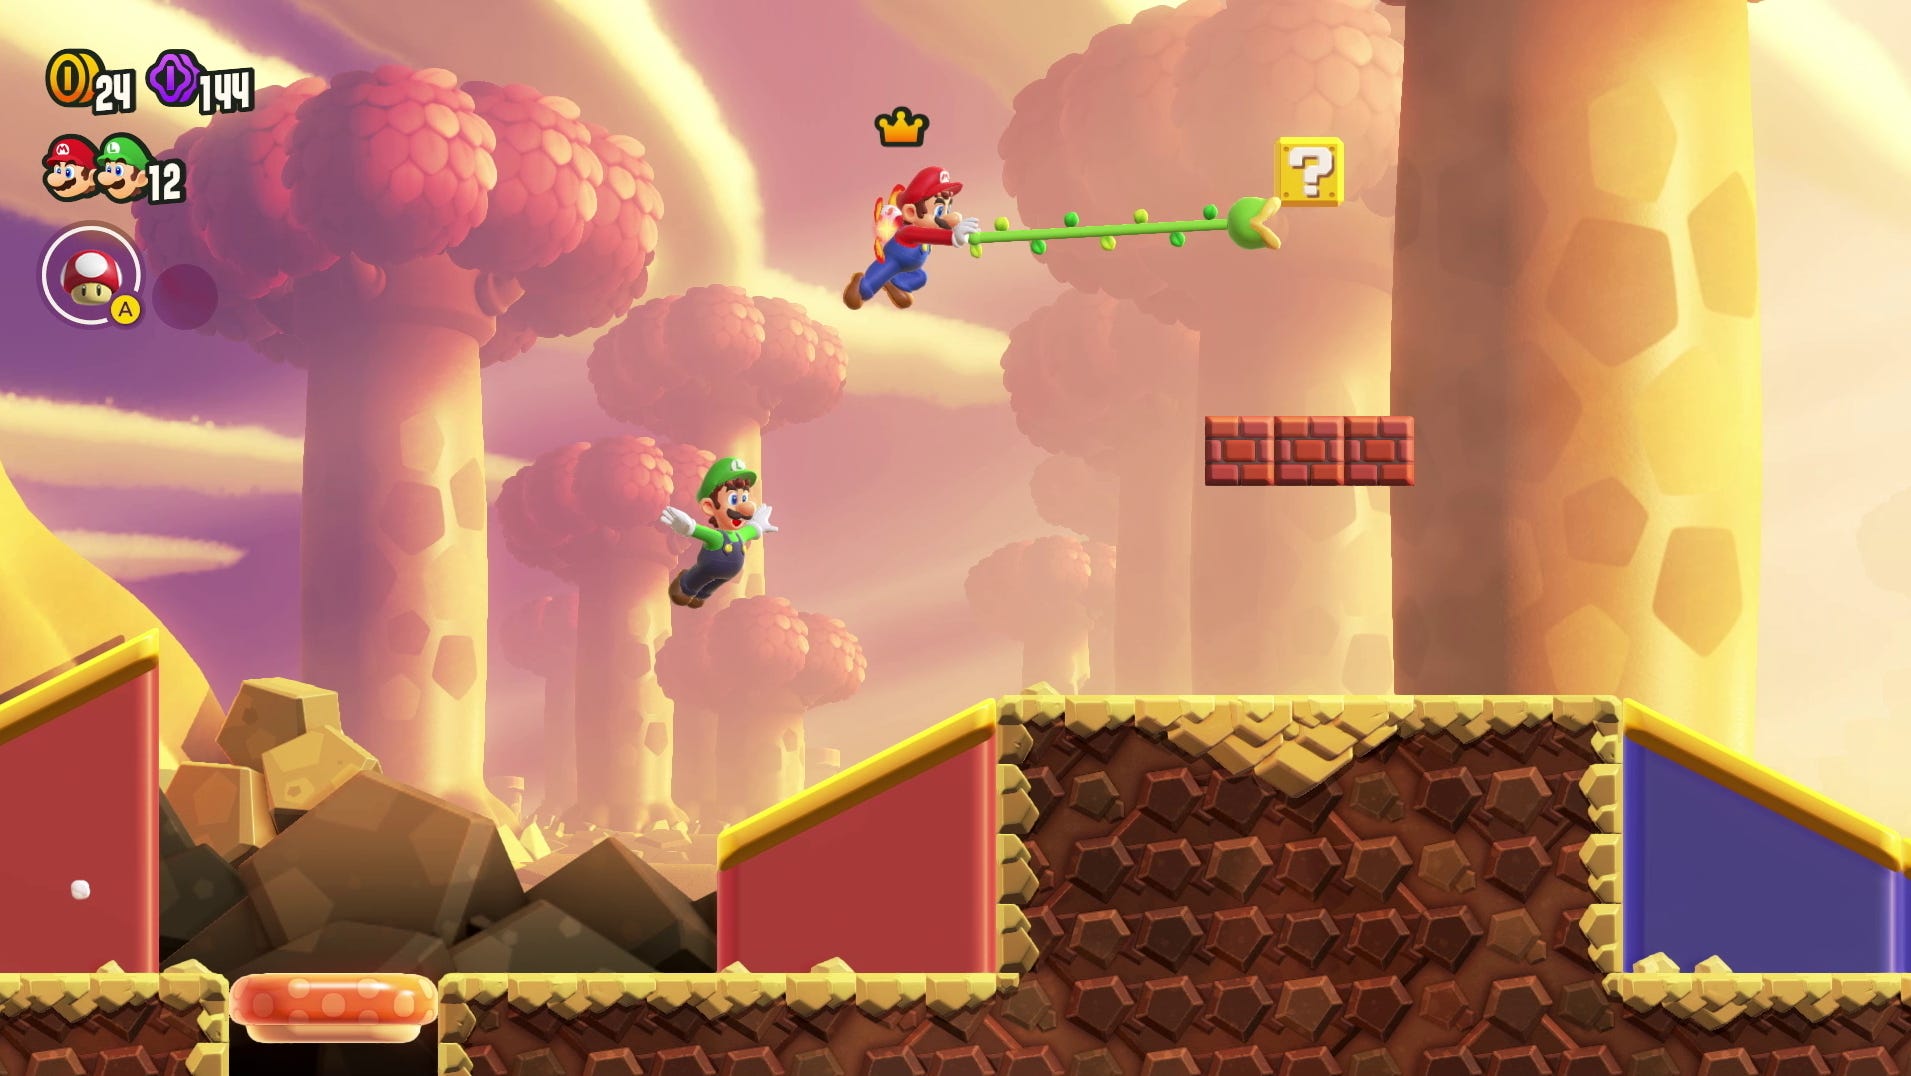 What Reviewers Are Saying About Super Mario Bros. Wonder